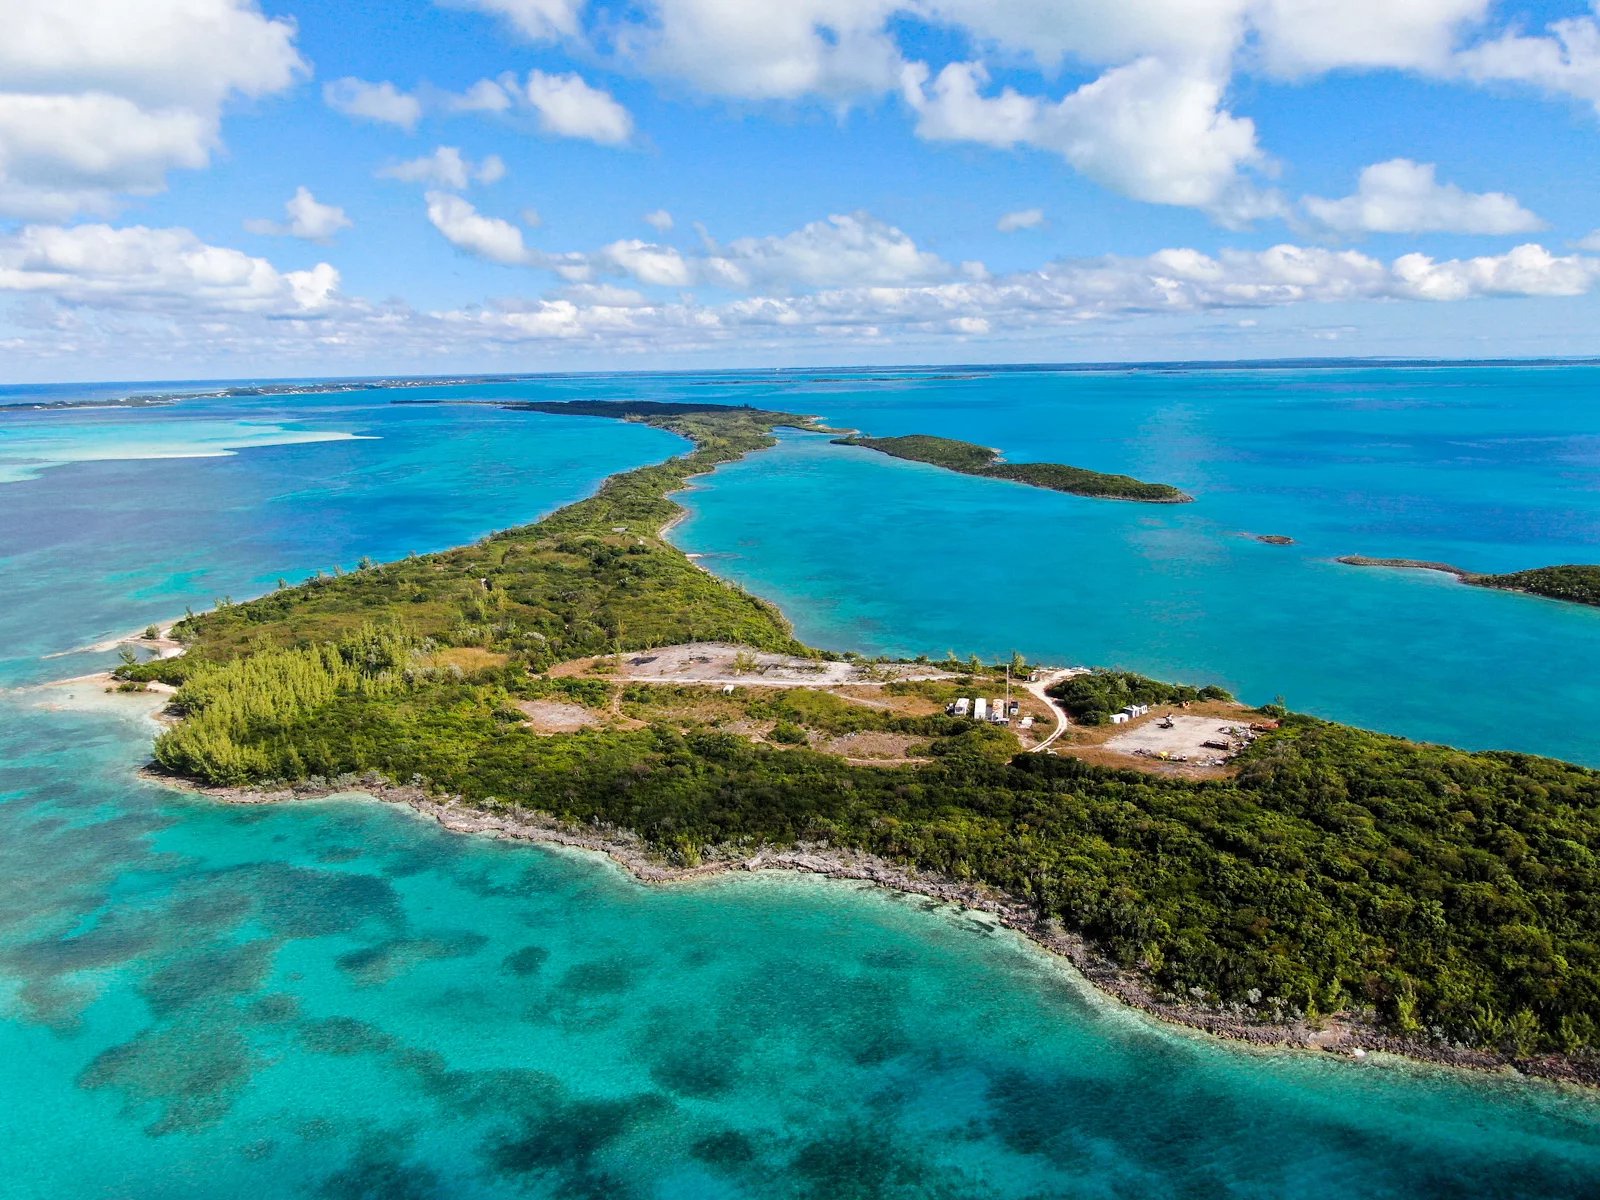 royal island, the perfect private island opportunity - mls 51444 image37